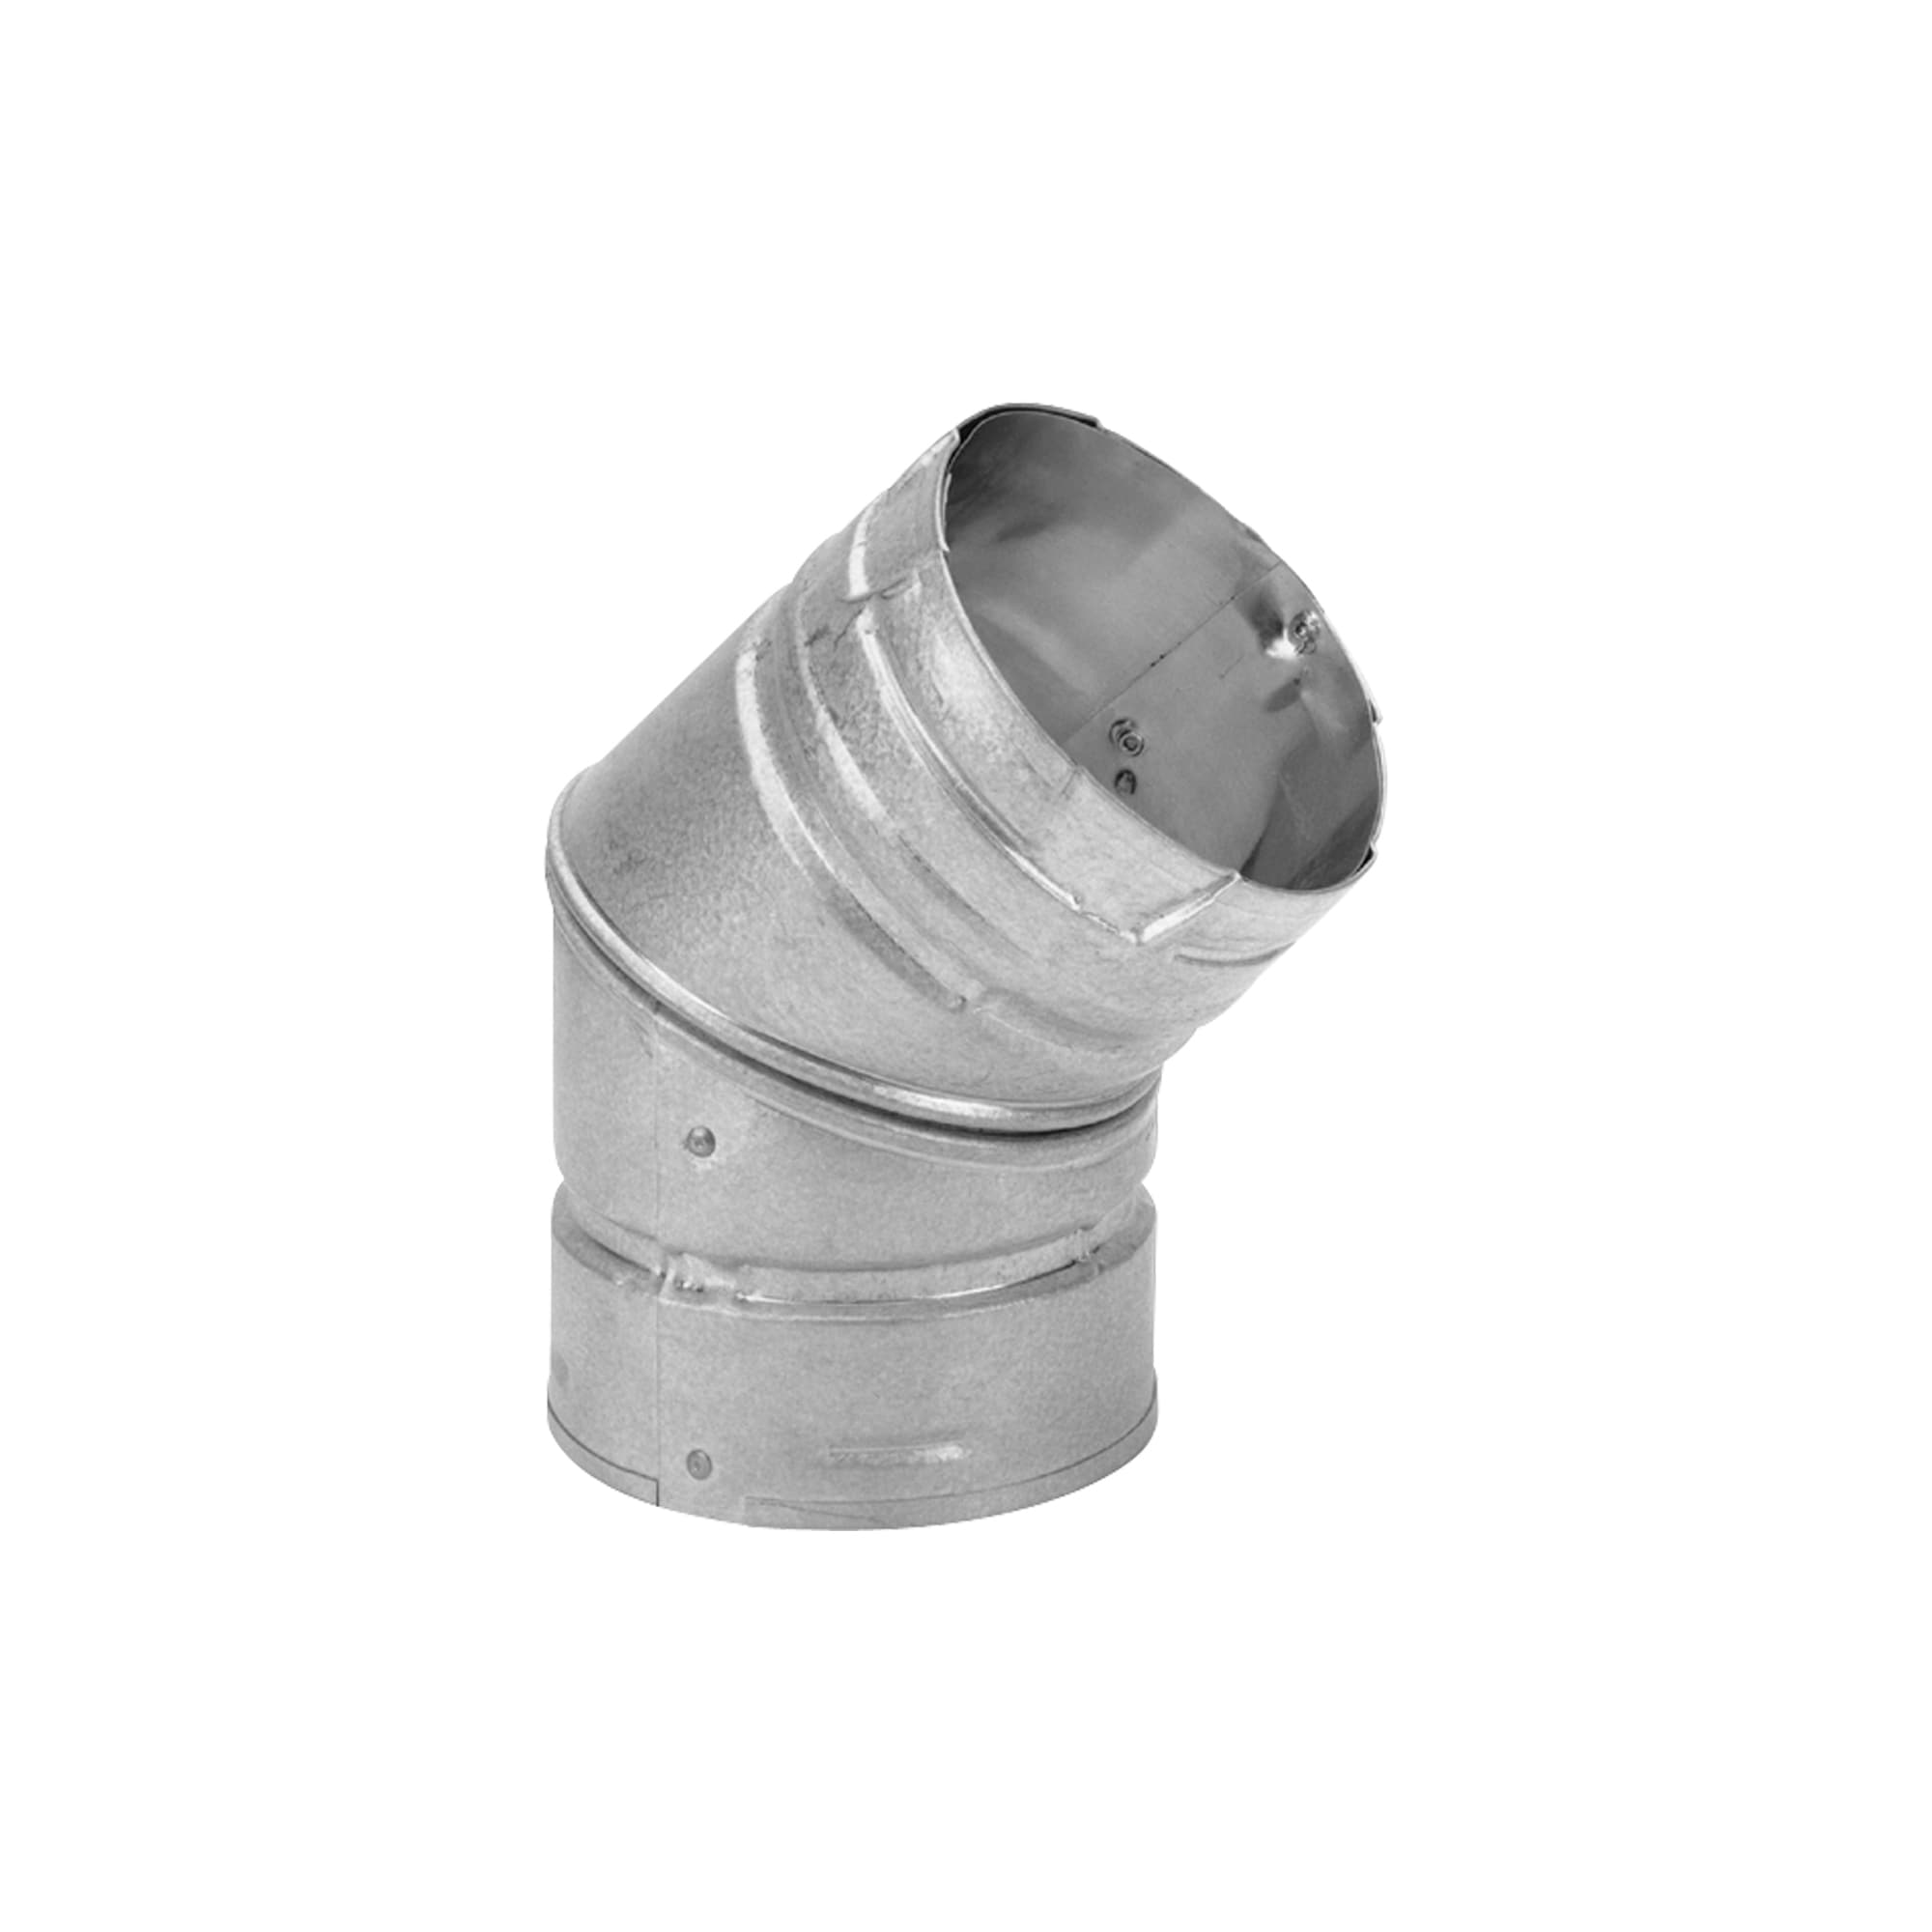 Duravent 3 In. x 12 In. Stainless Straight Pipe